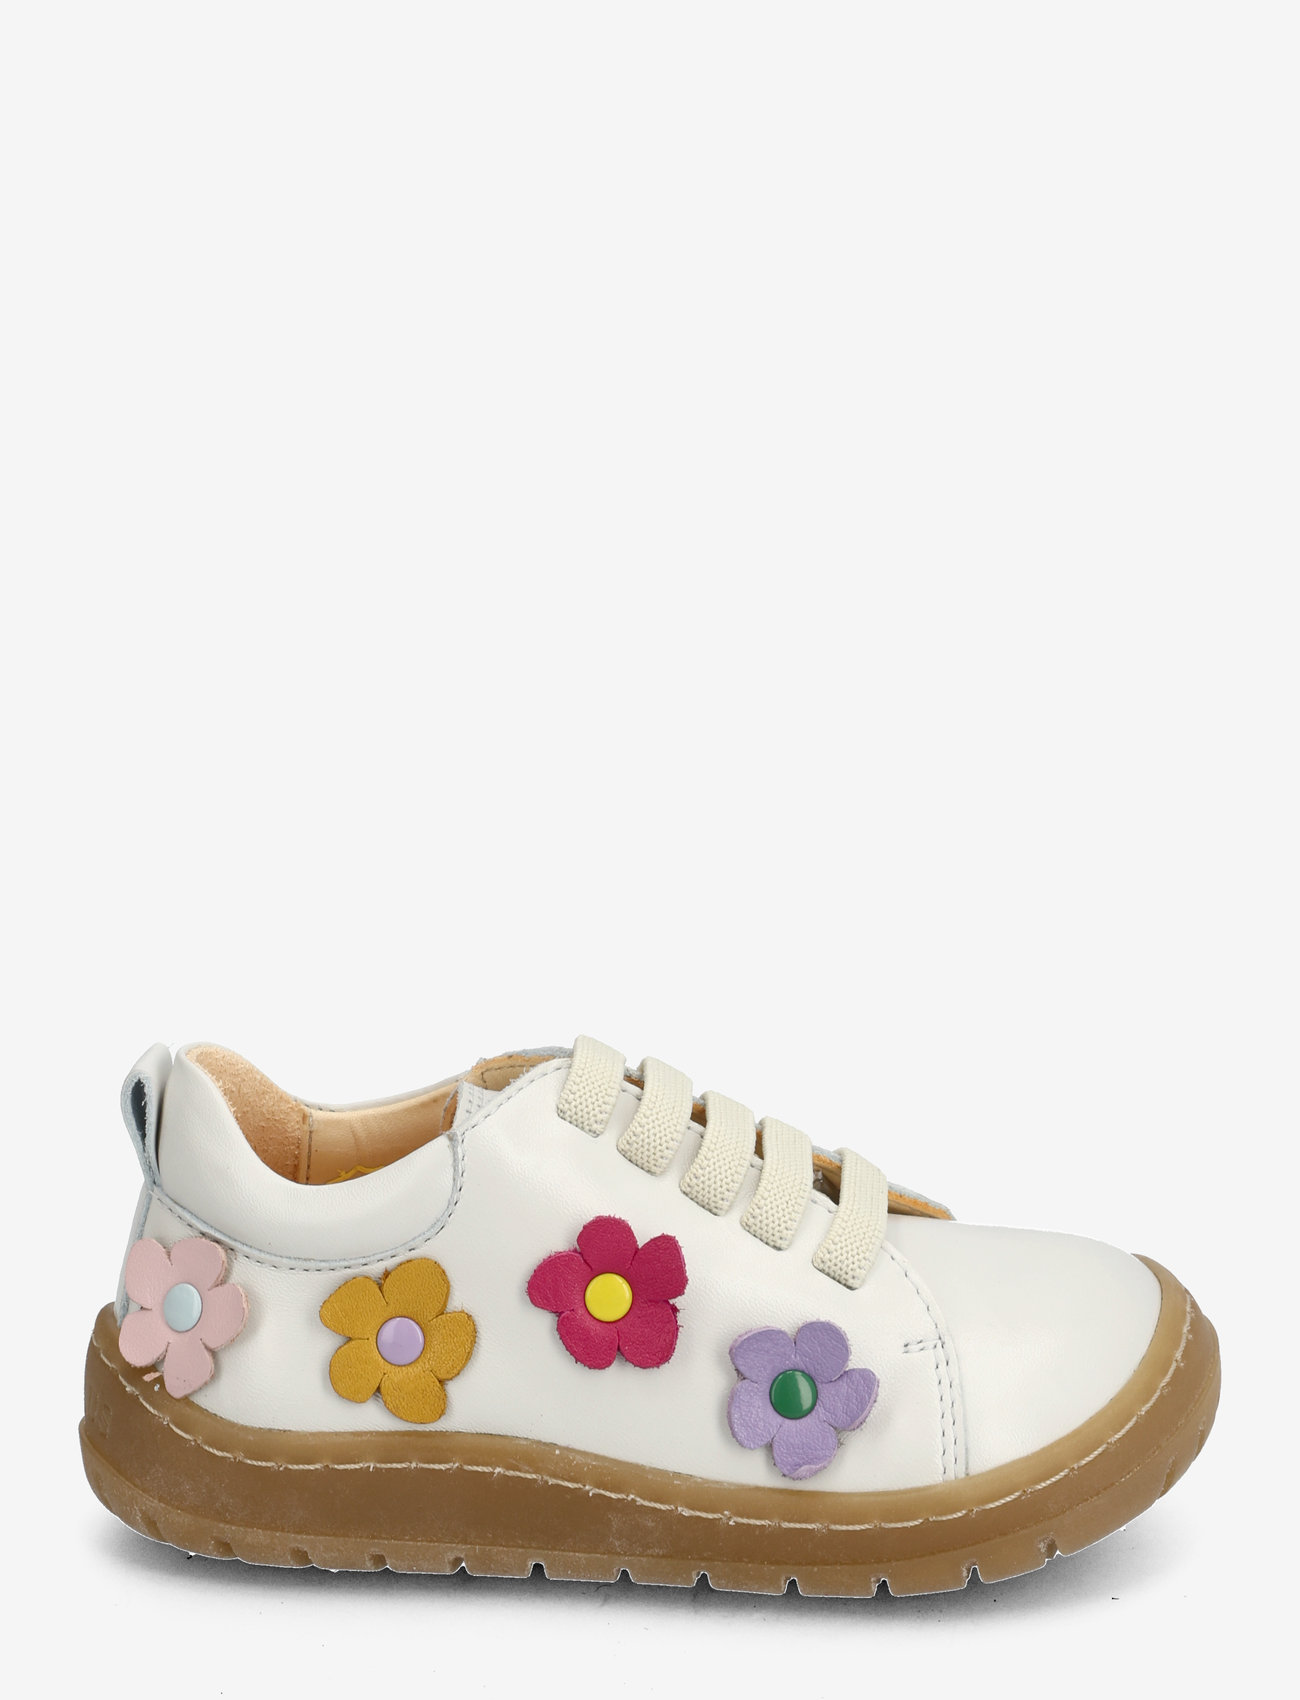 ANGULUS - Shoes - flat - with lace - sommarfynd - 1493/a002 off white/flowers - 1